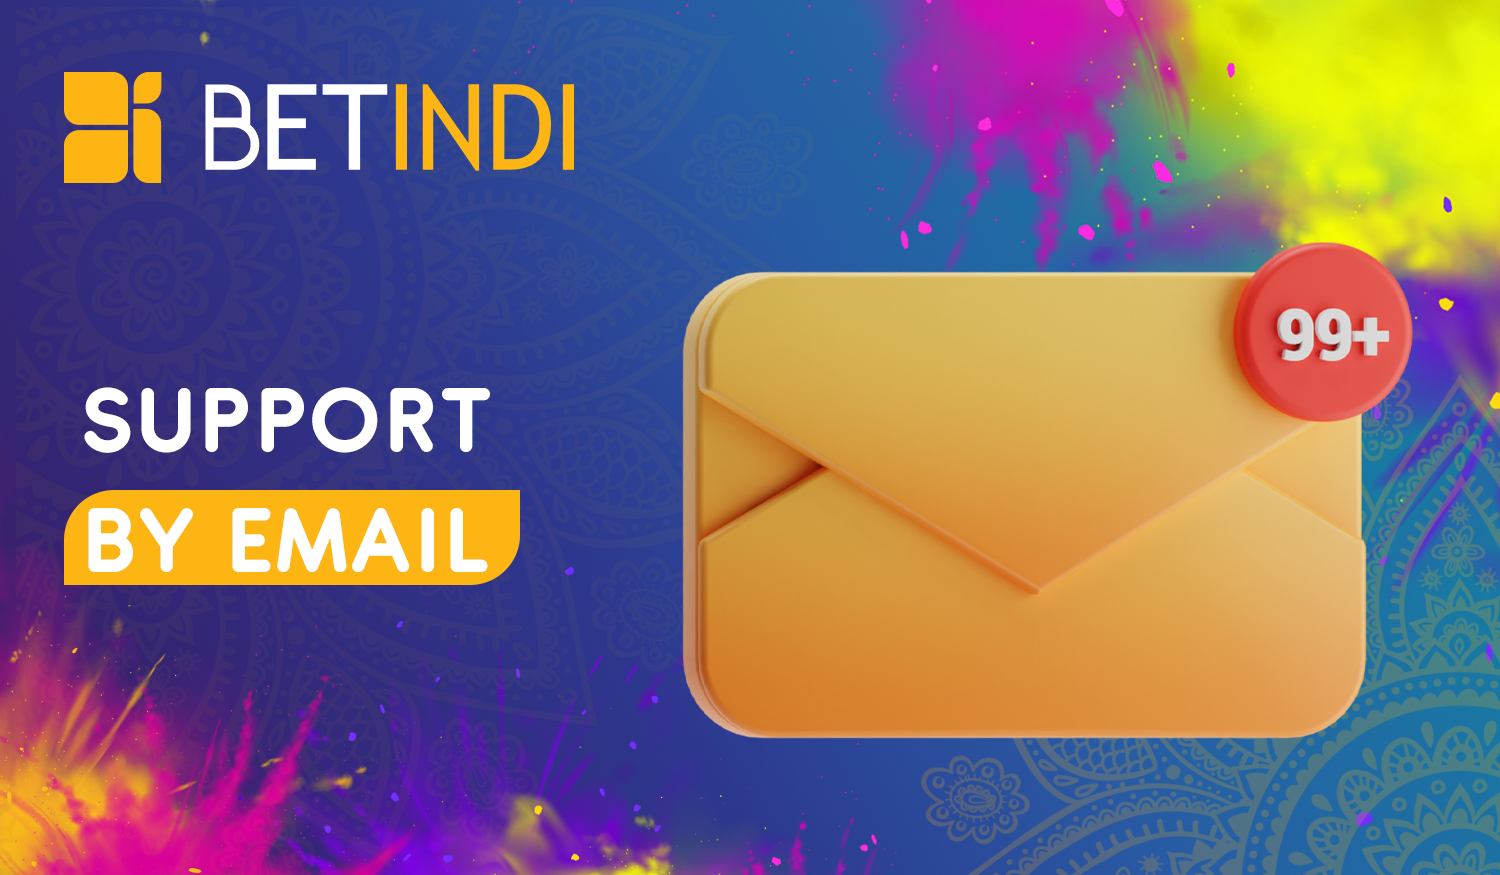 How to contact Betindi Support via email